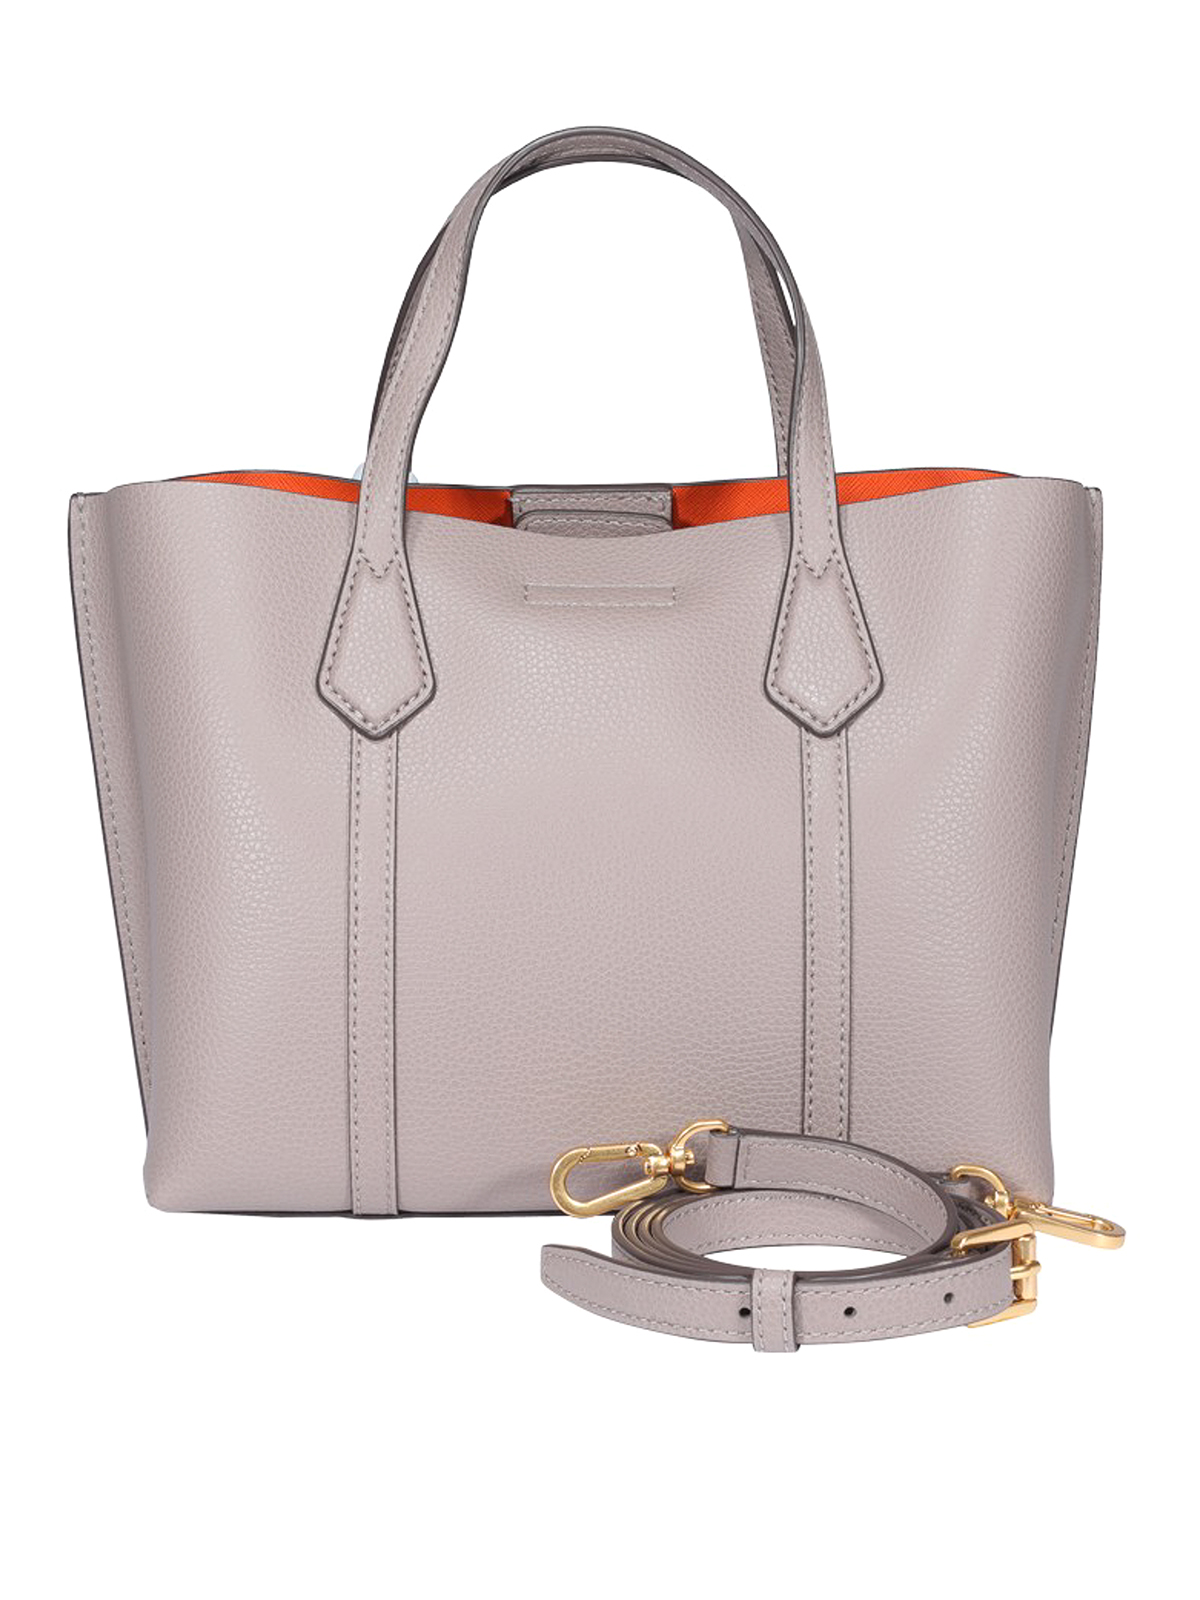 Tory Burch Grey Perry Small Leather Tote Bag